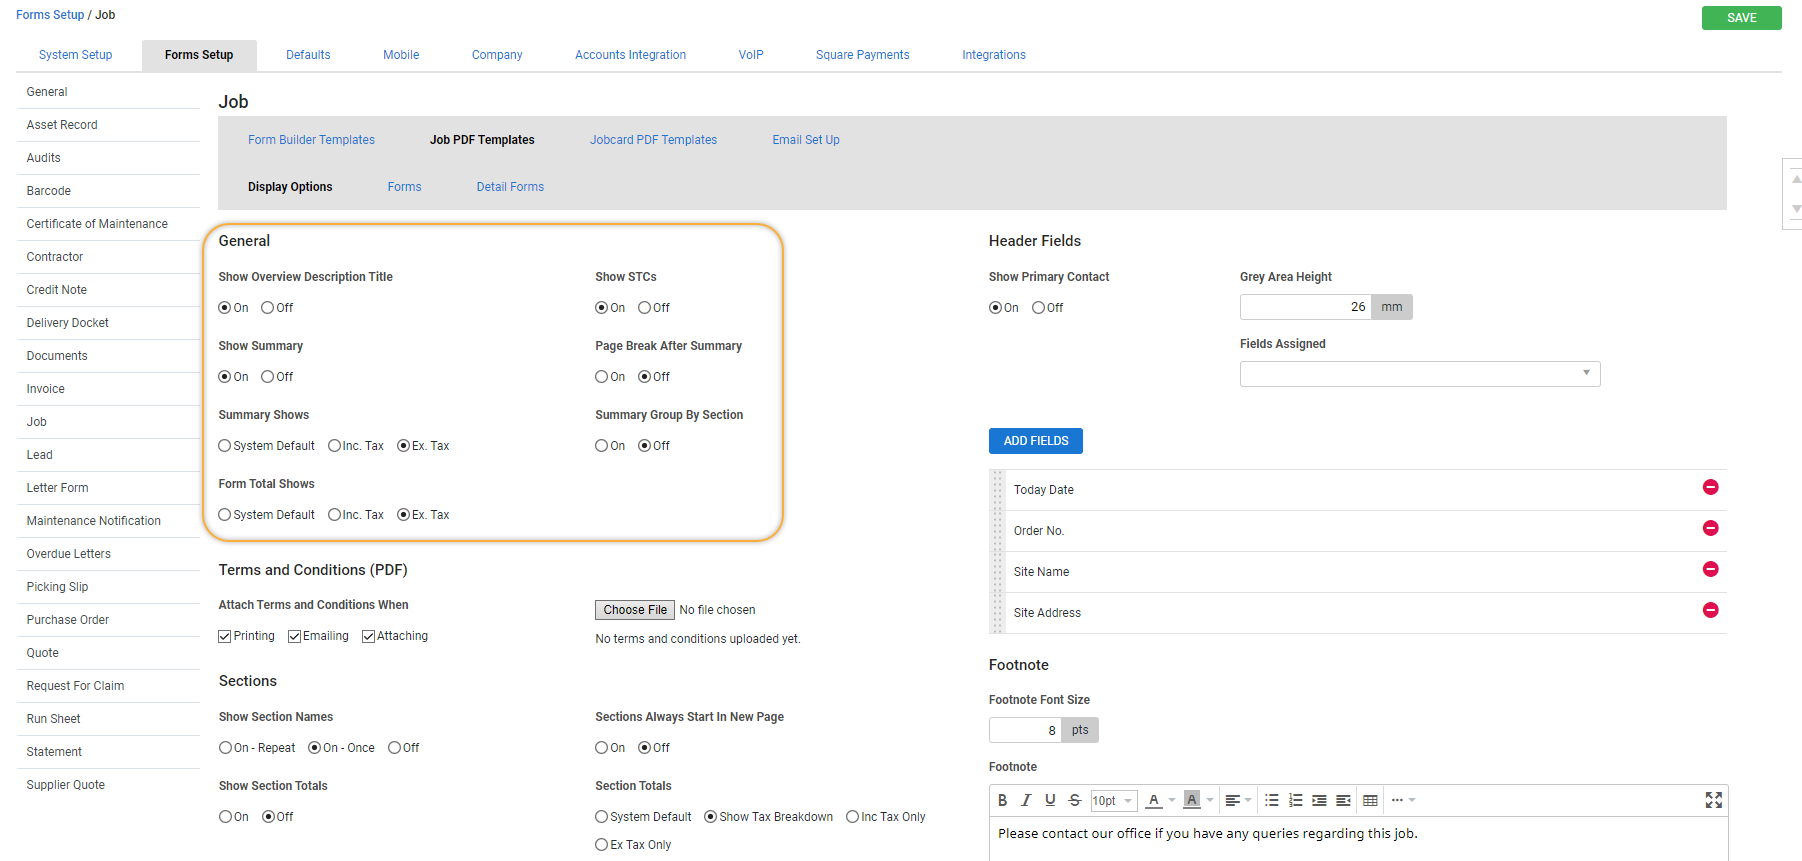 A screenshot of the General forms setup options for job forms.